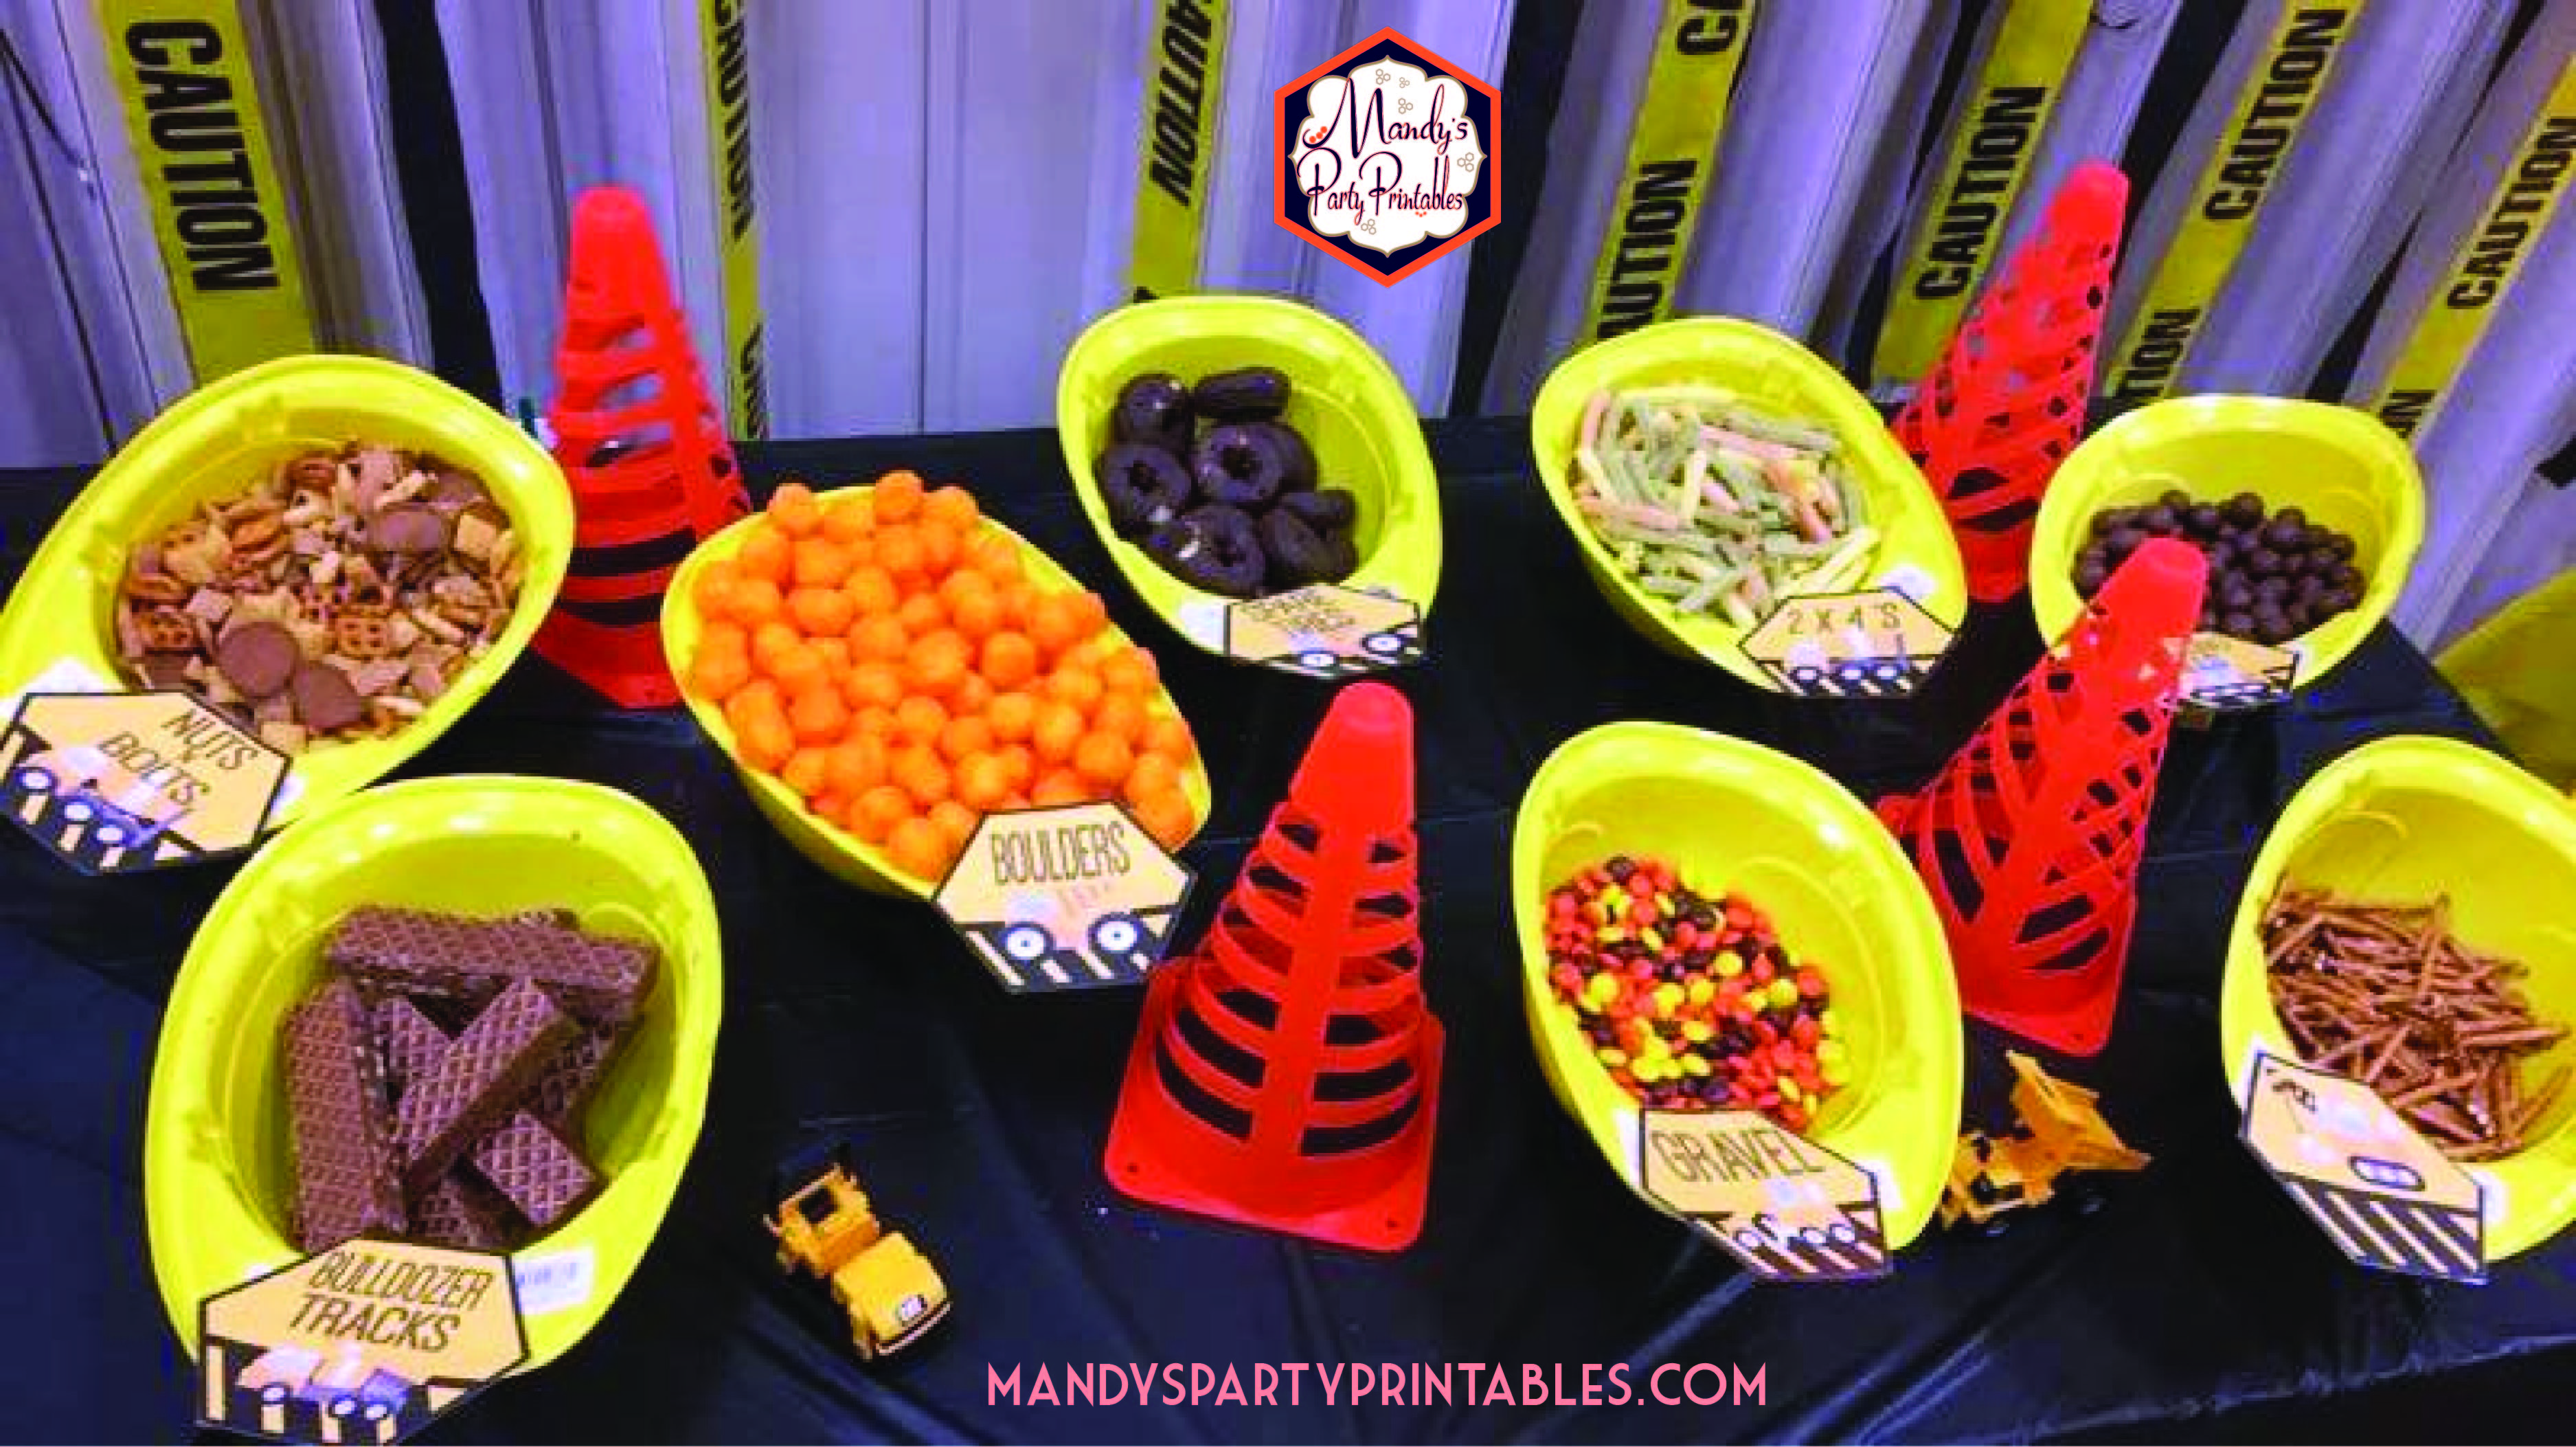 Food table with upside down hard hats filled with food. Food labels for the food "Bulldozer Tracks", "Boulders", "Gravel" and more | Mandy's Party Printables